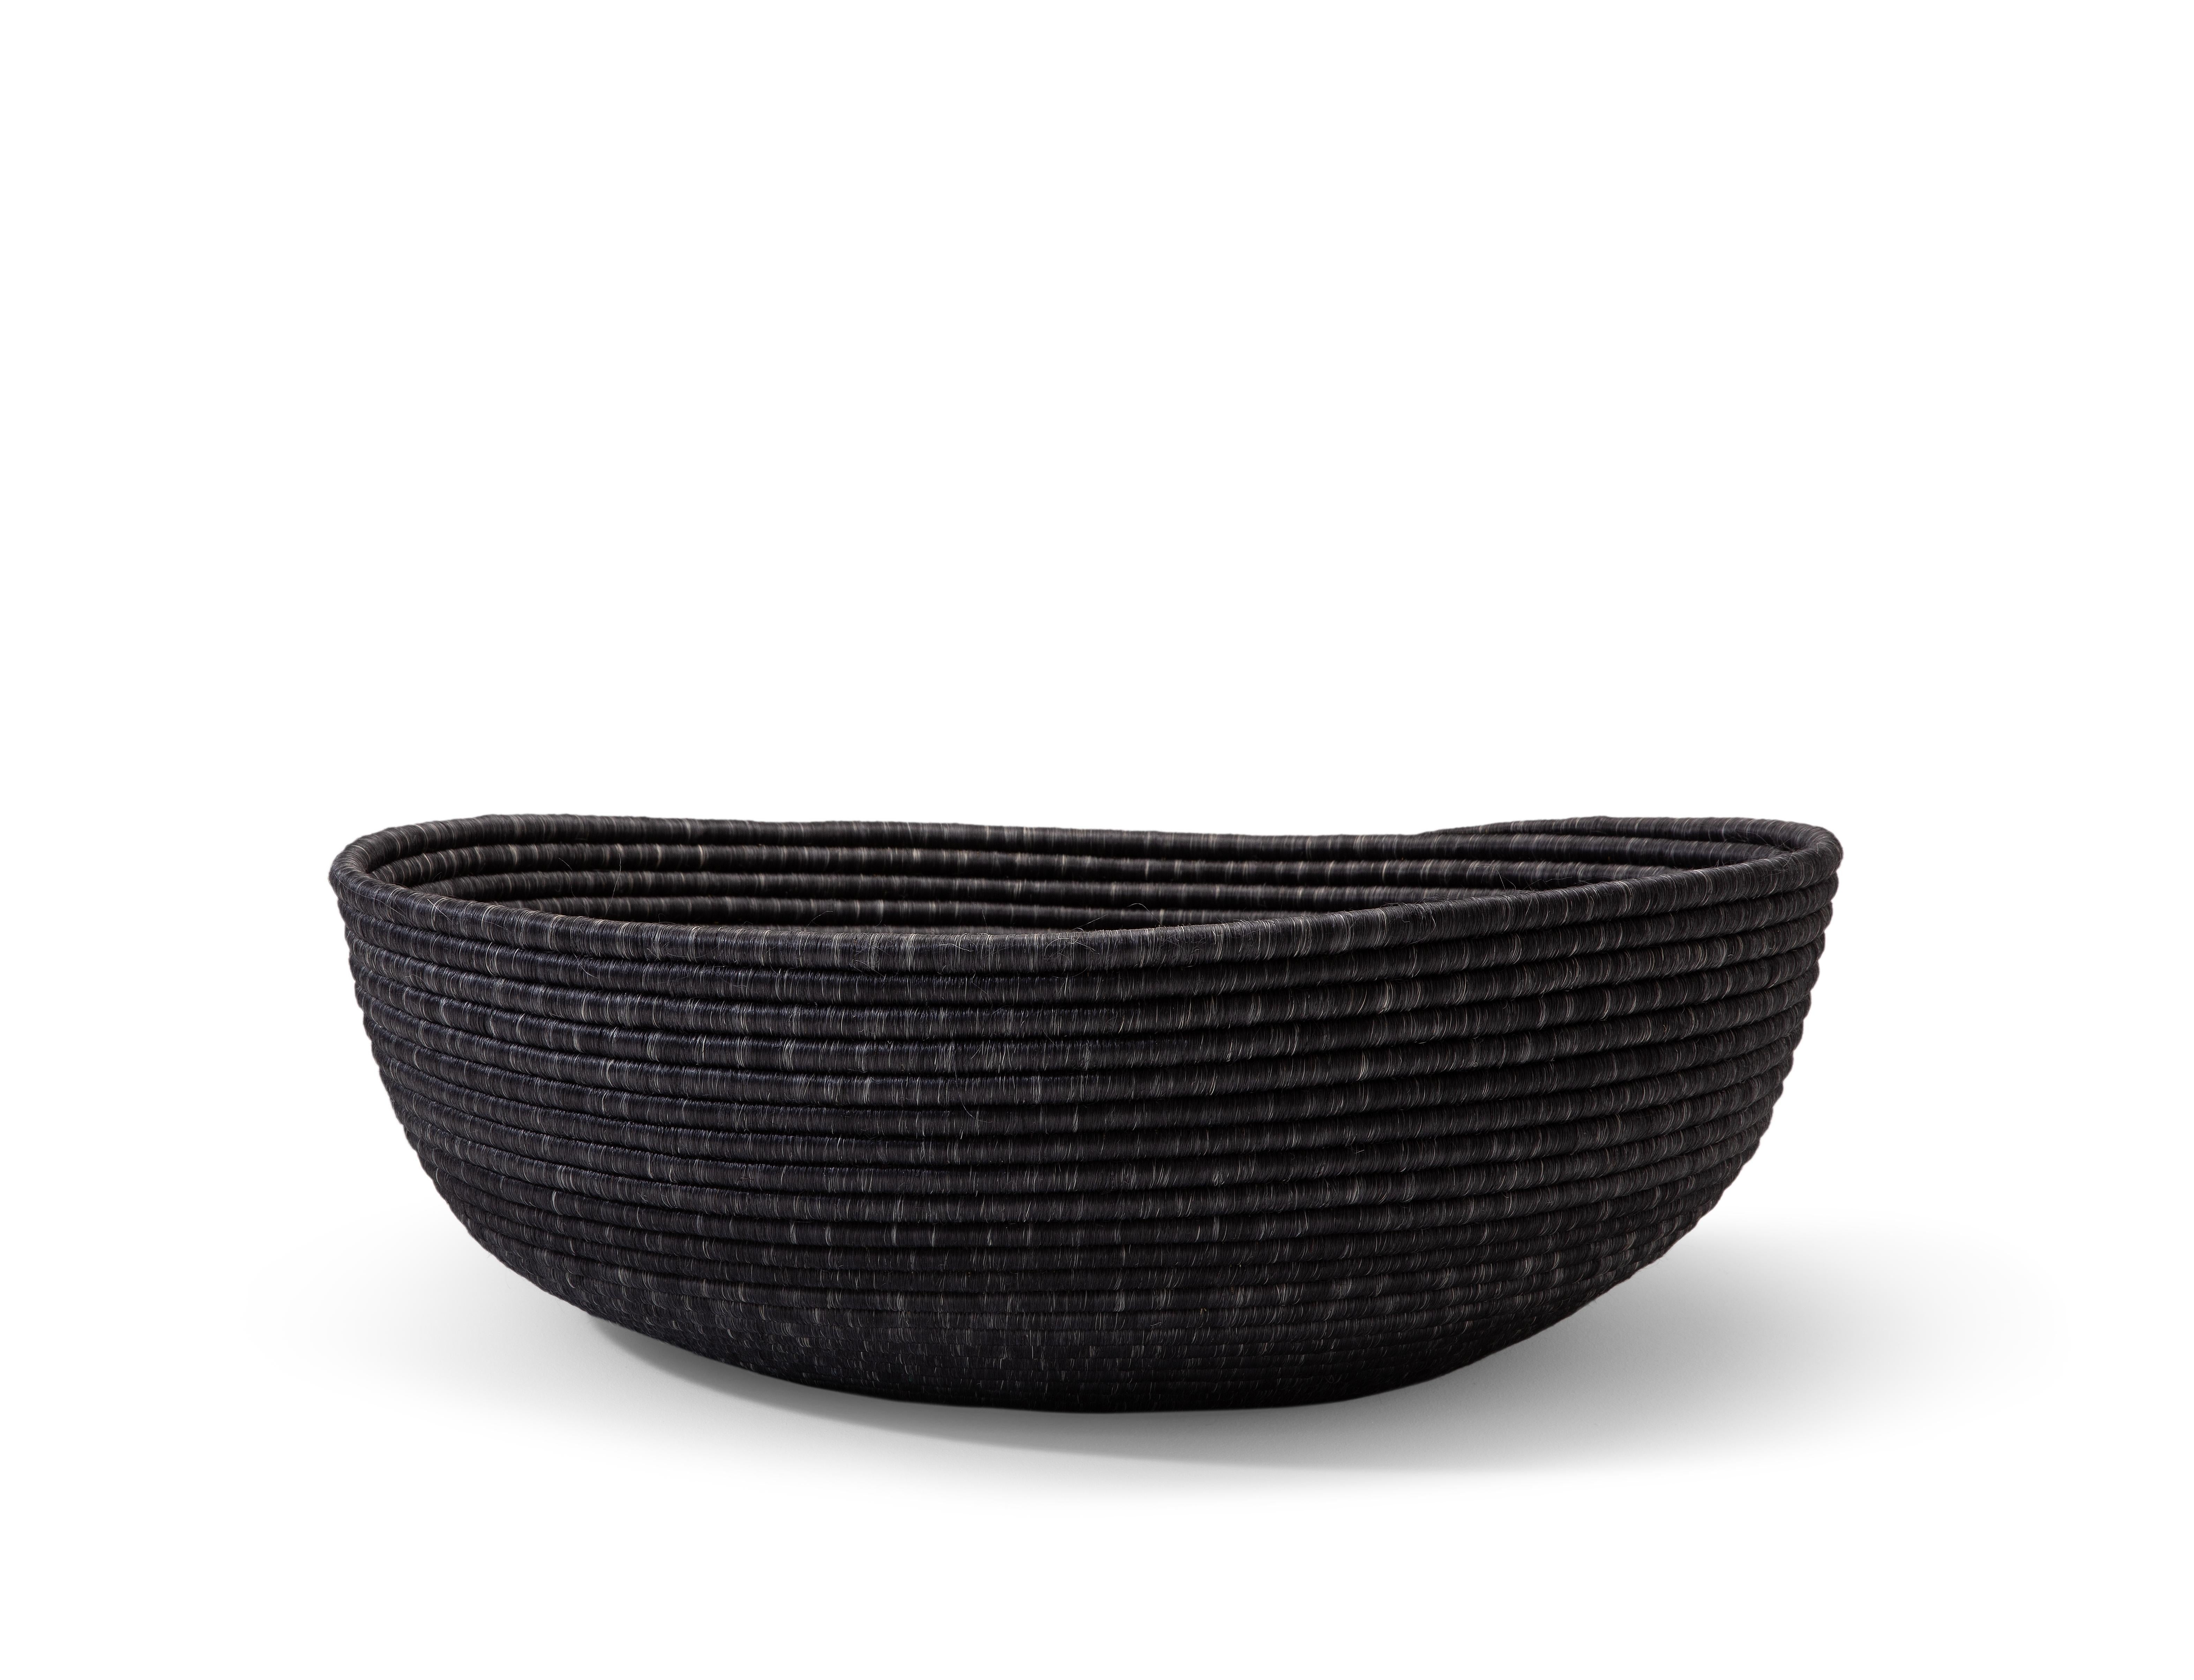 Large la che basket by Sebastian Herkner.
Materials: 100 % natural fique agave.
Technique: hand-woven in Colombia. 
Dimensions: diameter 78 cm x height 30 cm 
Available in colors: cobre, olive, black, cuerda. And other sizes.
The La Che Basket